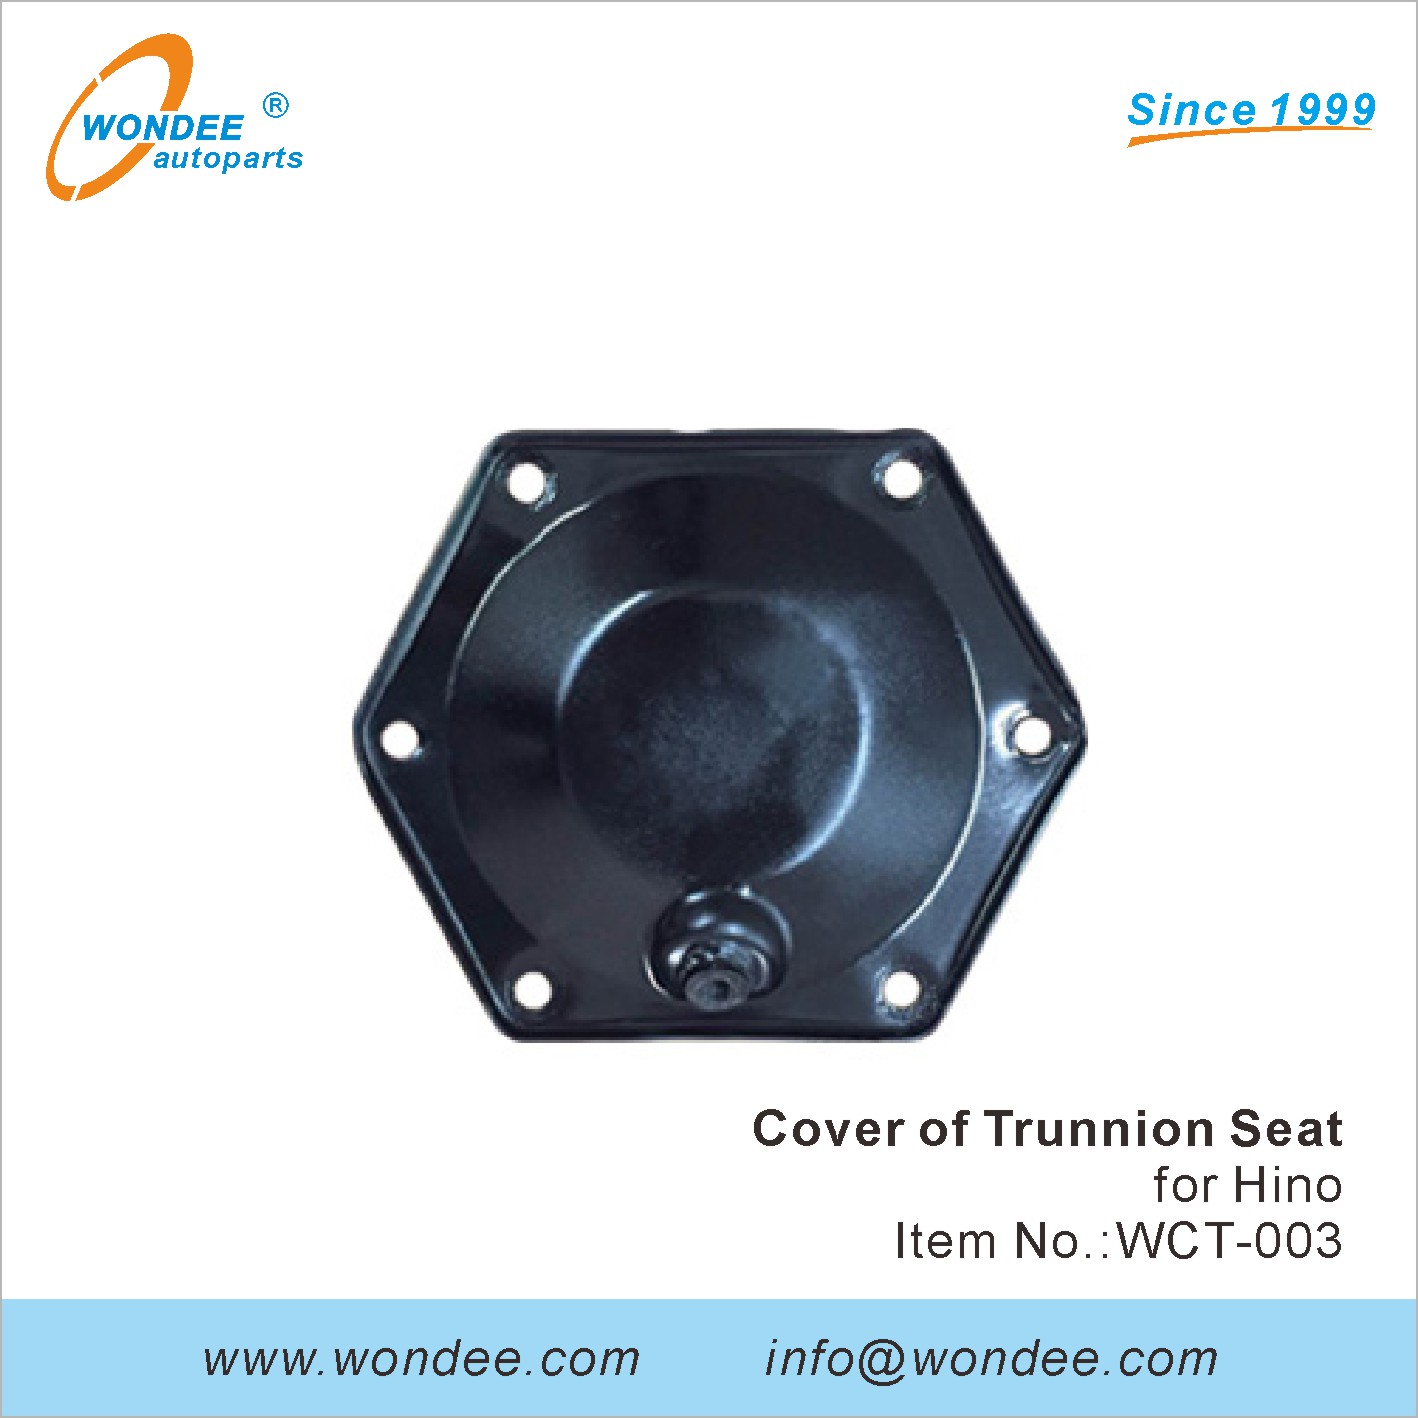 WONDEE cover of trunnion seat (3)